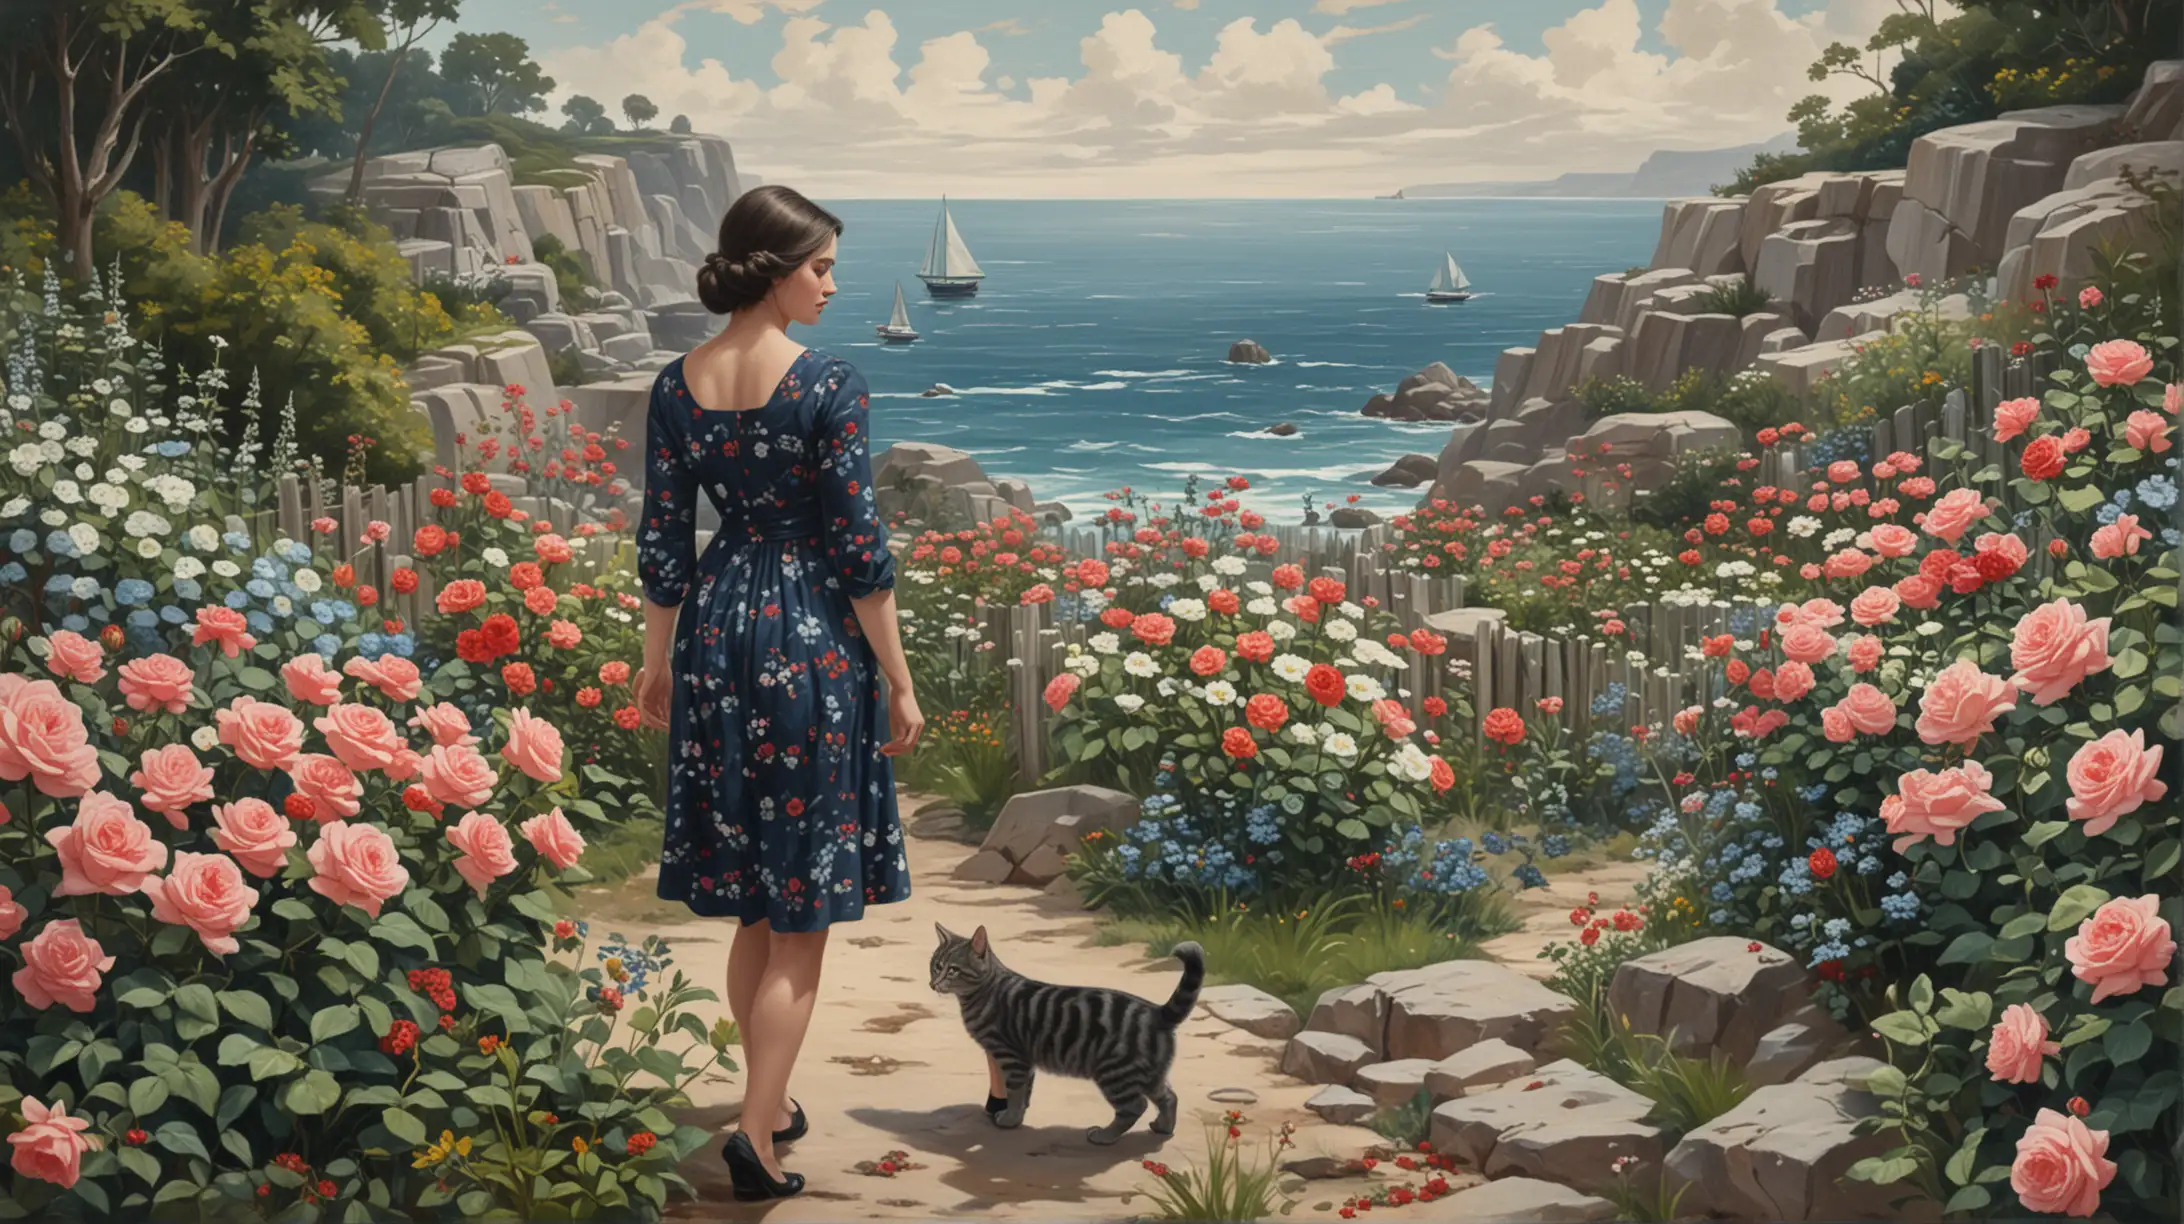 in the style of Charles Courtney Curren, a painting seen from a distance a woman with dark hair dressed in a short navy blue floral print sheath dress seen from a distance tending her flower garden with roses and other flowers, two gray tabby cats accompany her, depth of field to a glimpse of ocean with a rocky shore